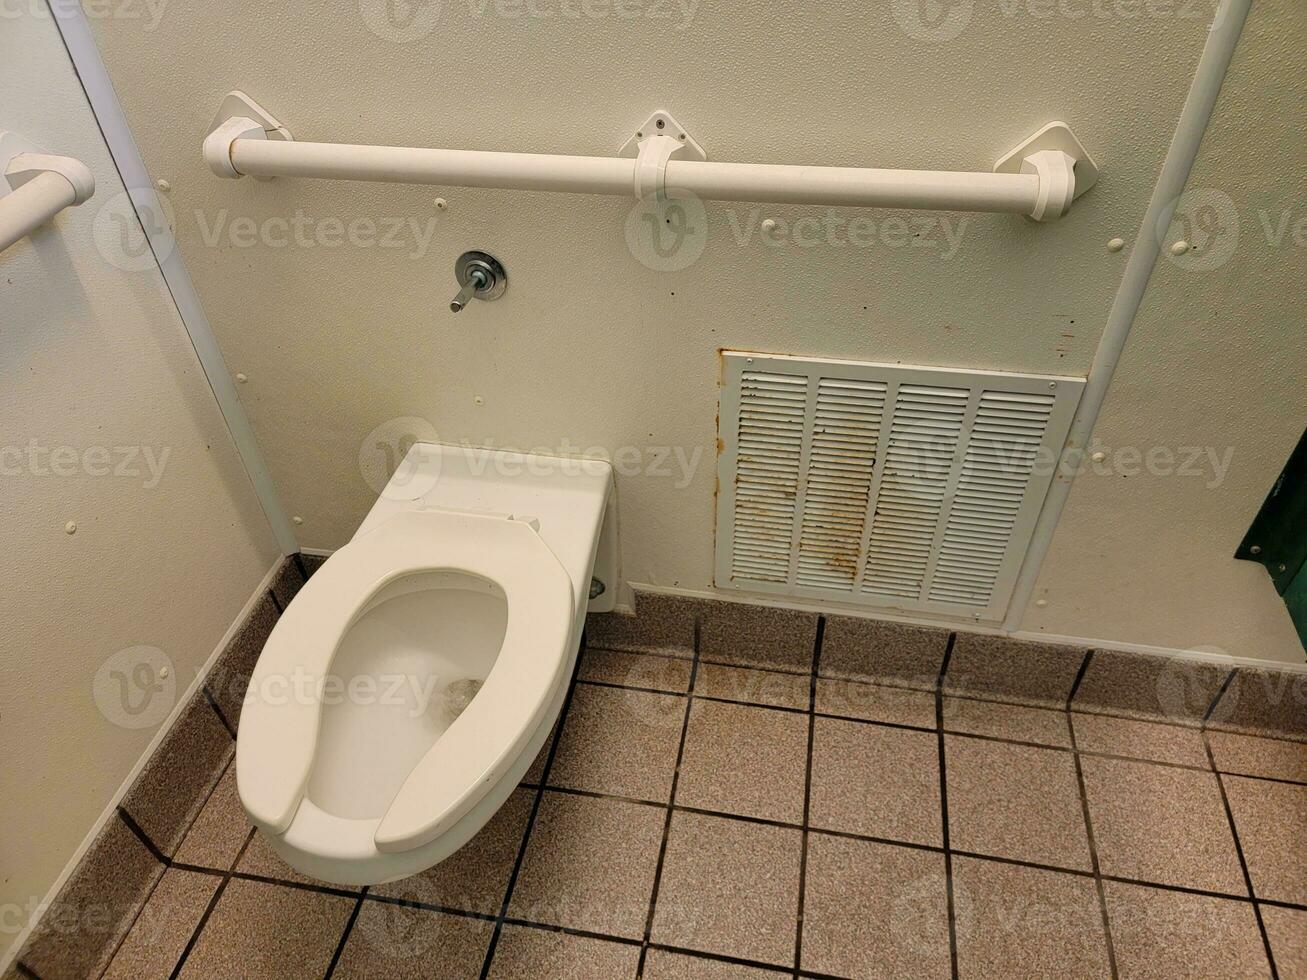 toilet and rusty heater in bathroom or restroom stall photo